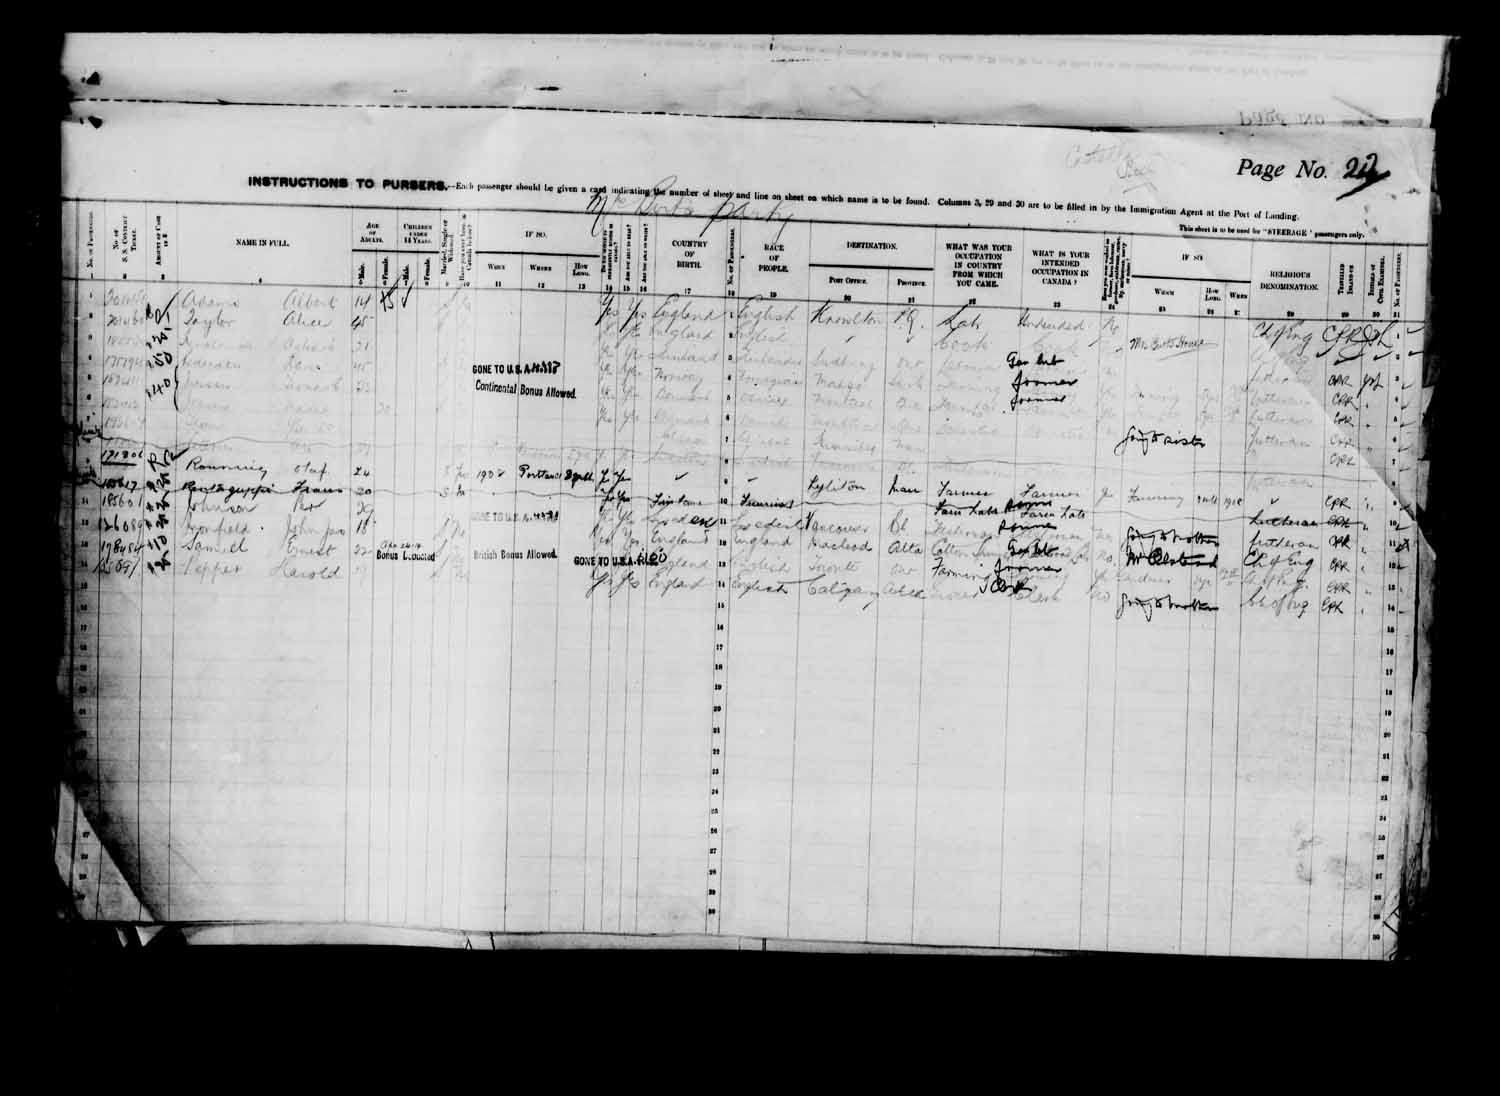 Digitized page of Passenger Lists for Image No.: e003627212